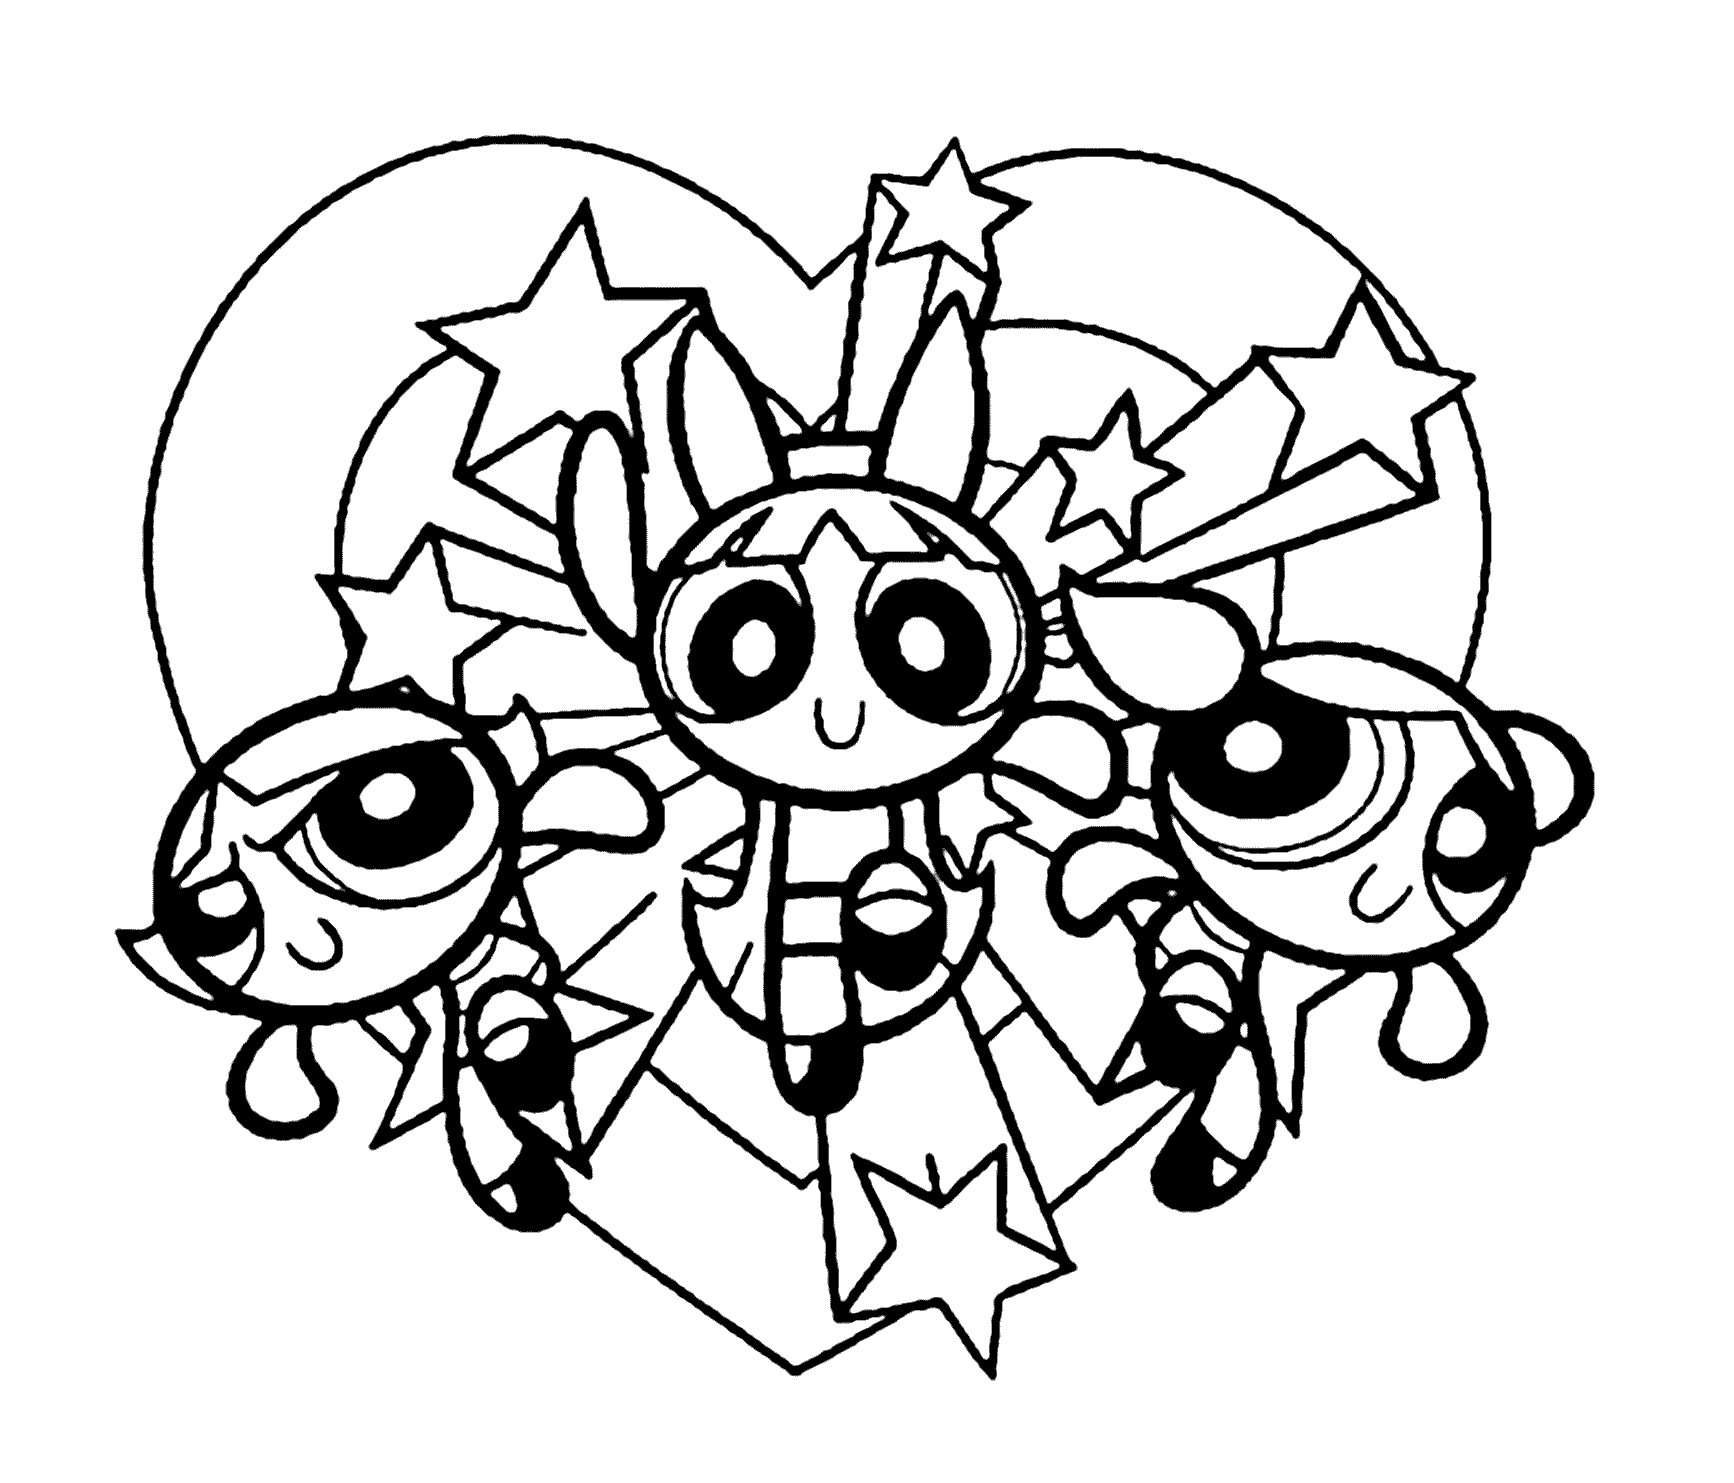 Powerpuff Girls Coloring Sheet
 Coloring Pages For Girls 9 10